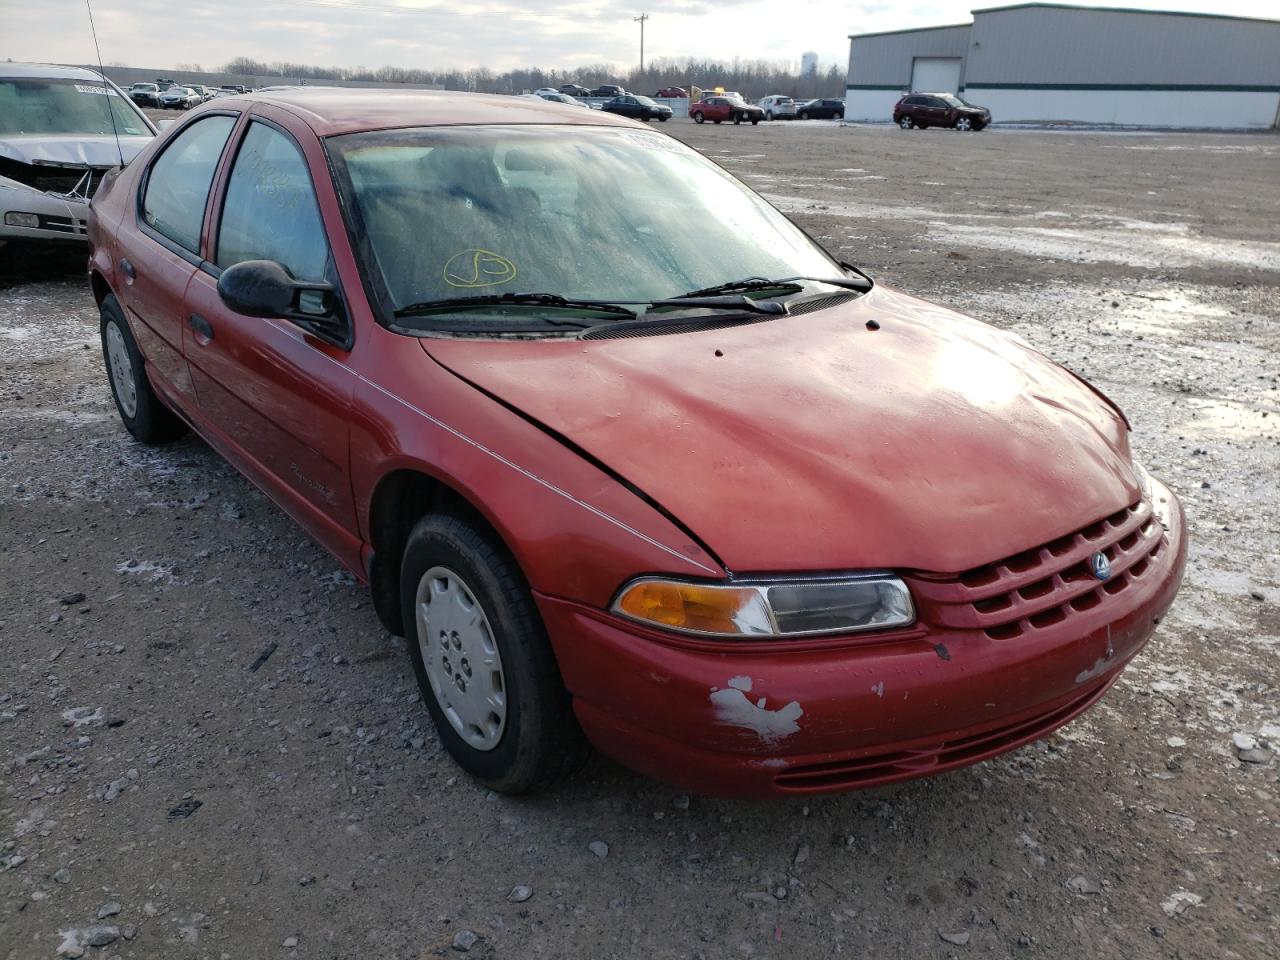 1999 Plymouth Breeze Base for sale at Copart Leroy, NY. Lot #69983*** |  SalvageAutosAuction.com